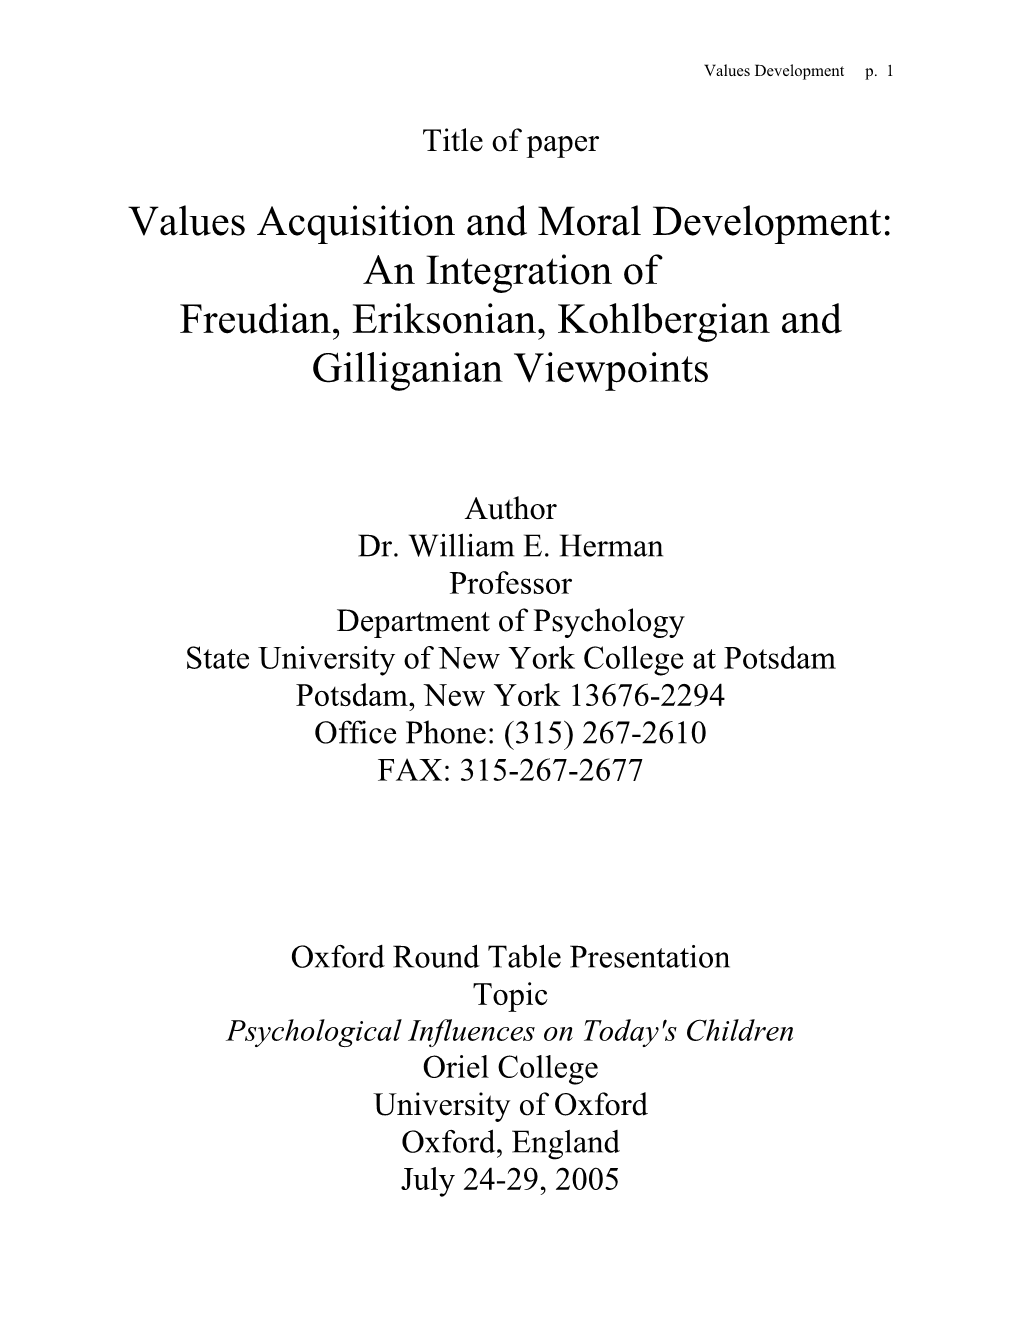 Values Acquisition and Moral Development: an Integration of Freudian, Eriksonian, Kohlbergian and Gilliganian Viewpoints